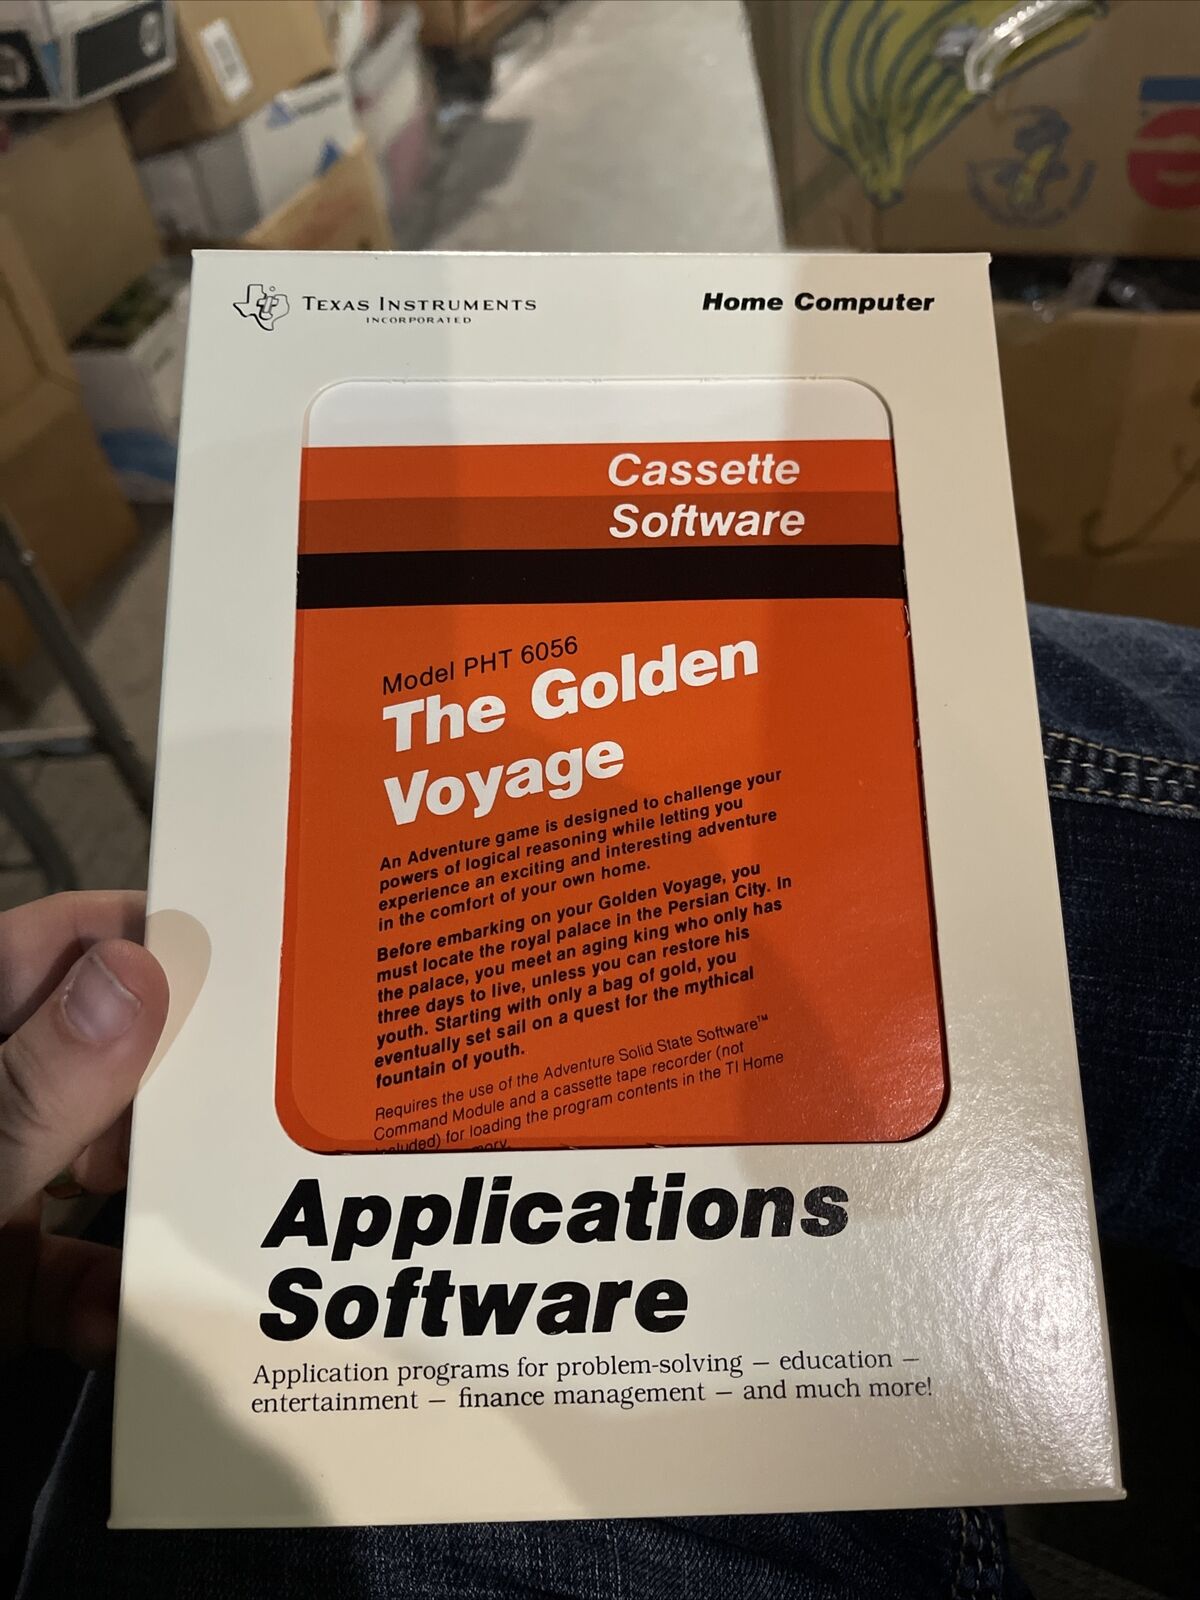 Minty New Nos TI99-4a Home Computer The Golden Voyage Cassette Rare PHT 6056